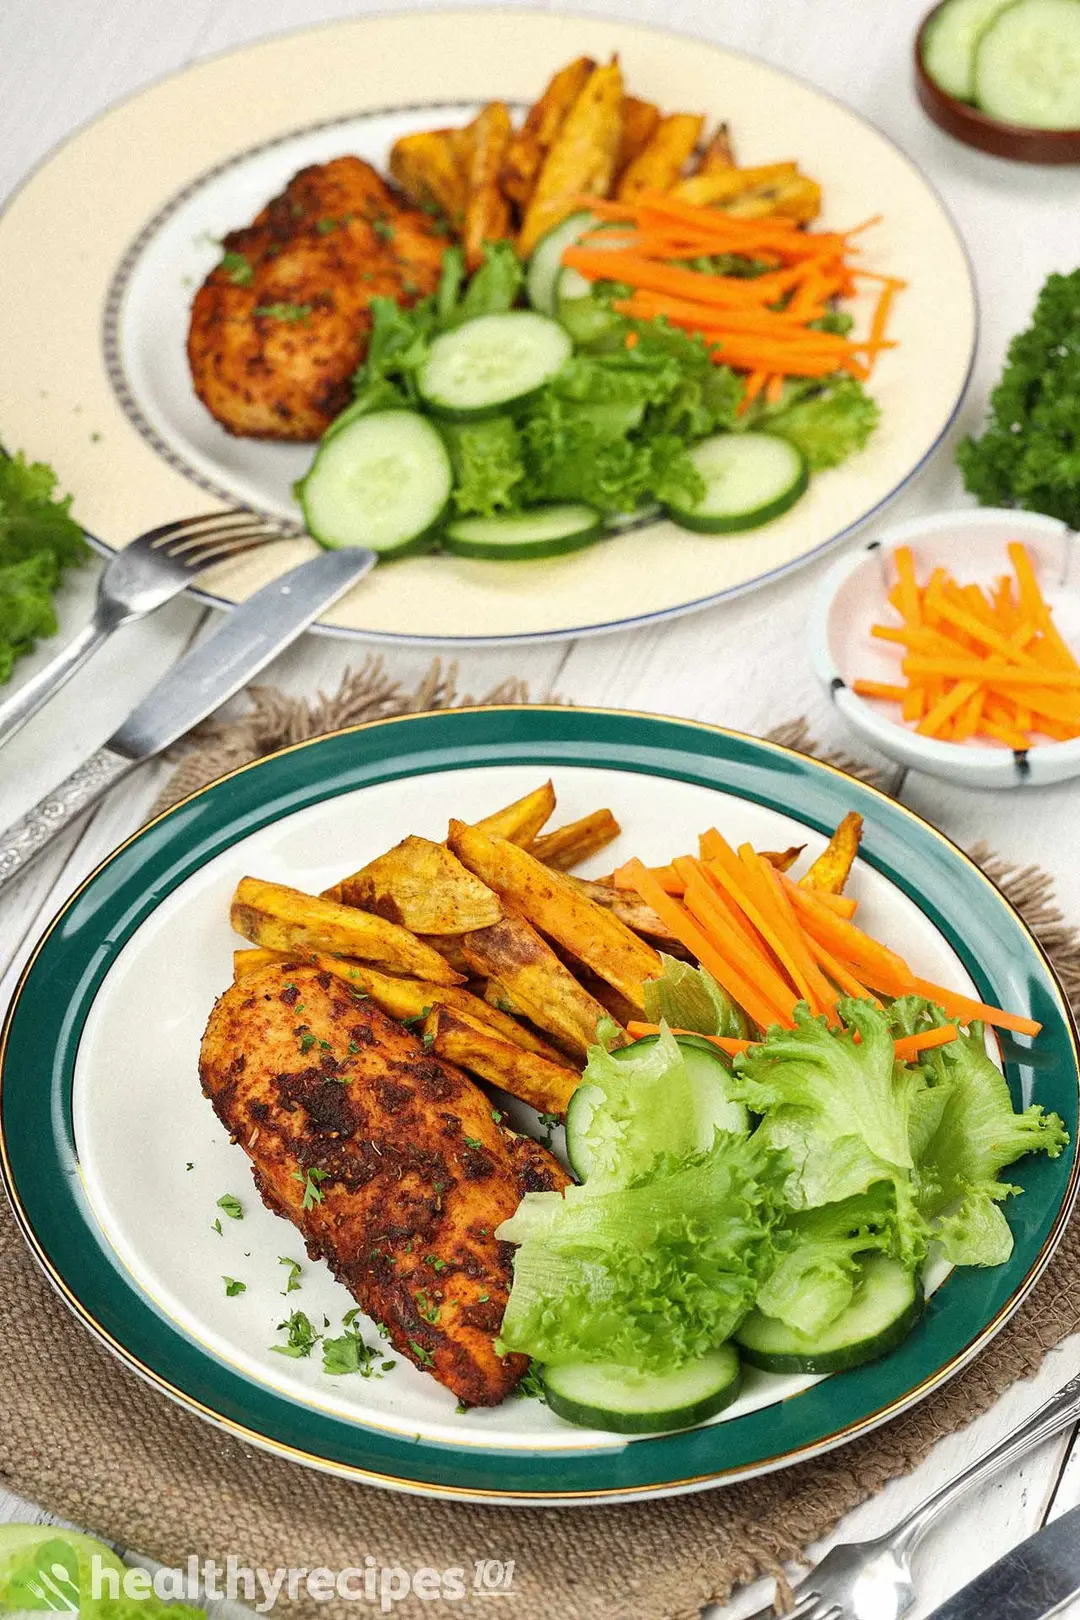 Two plates containing cooked chicken breasts covered in spices, sweet potato fries, cucumber slices, julienned carrots, and lettuce leaves